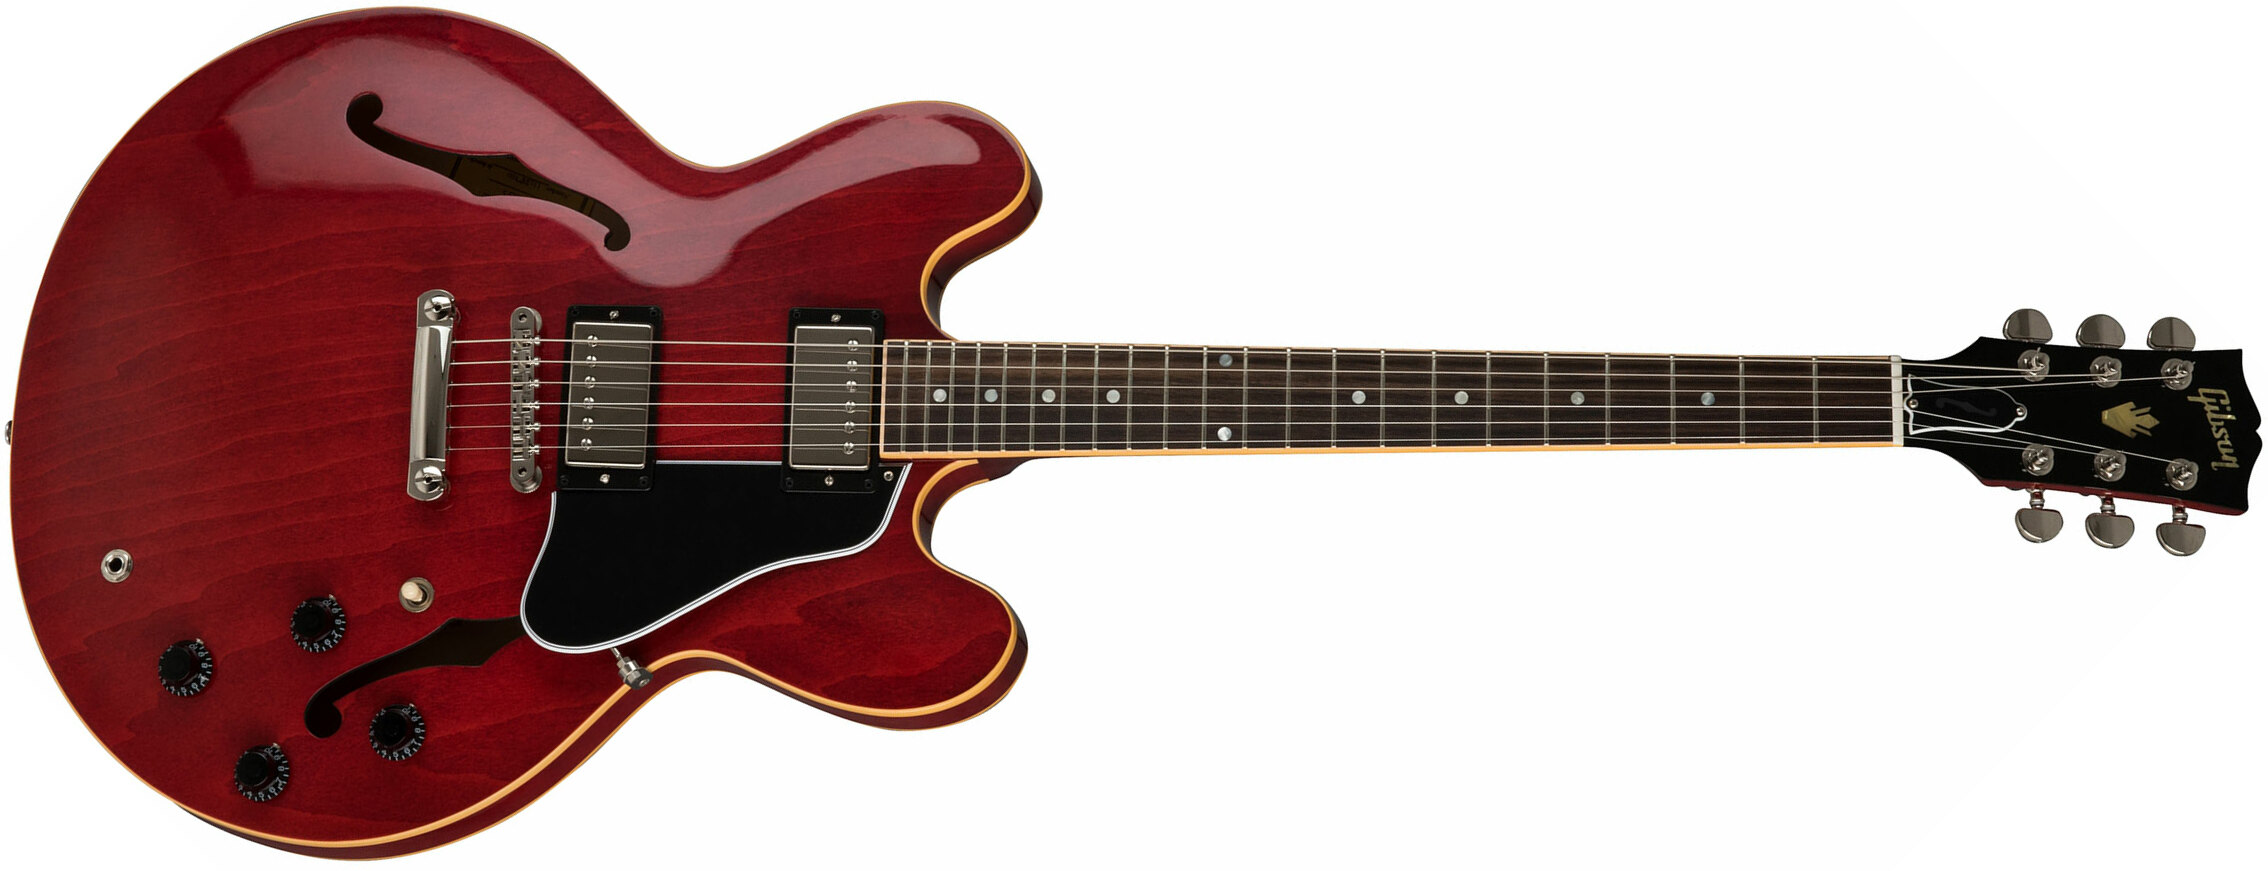 Gibson Es-335 Dot 2019 Hh Ht Rw - Antique Faded Cherry - Semi-hollow electric guitar - Main picture